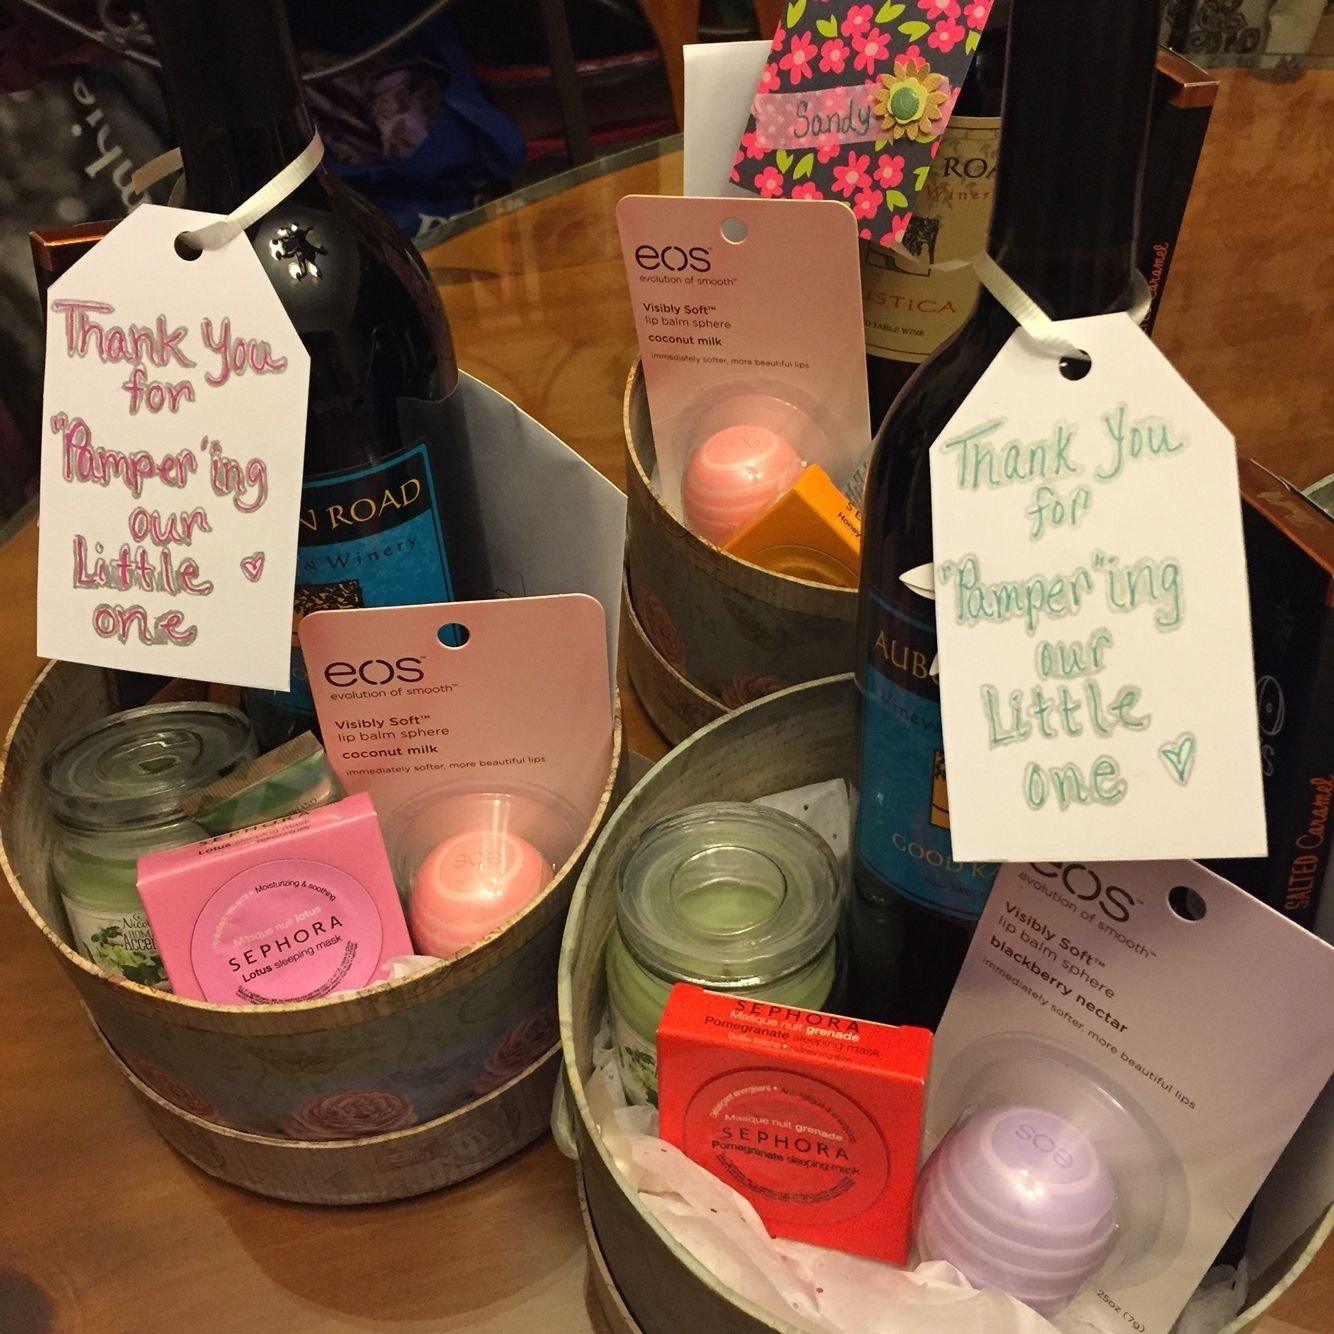 10 Attractive Gift Ideas For Baby Shower Hostess thank you baskets for friends who hosted our baby shower fun 2022